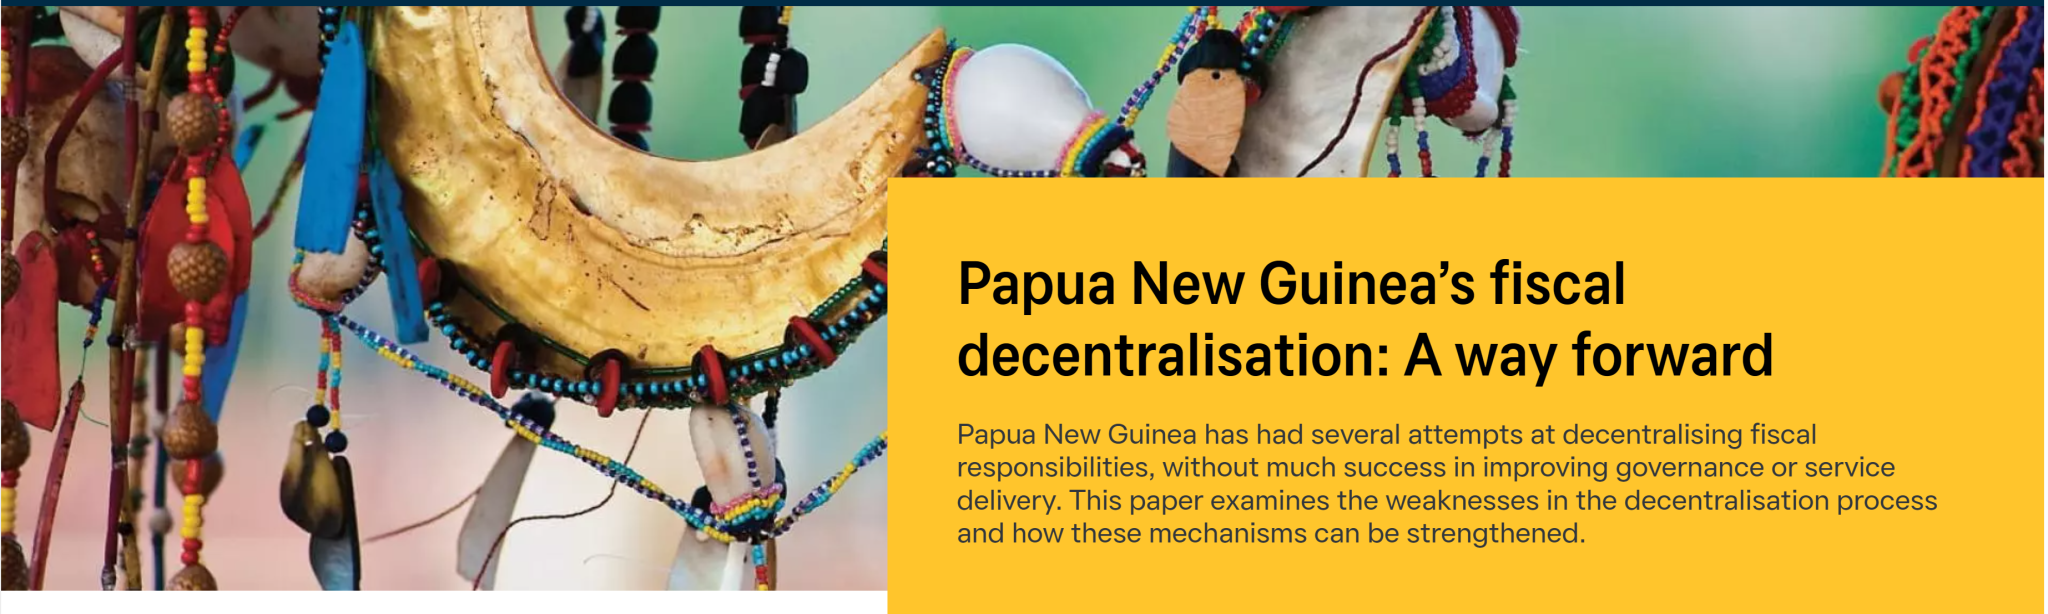 Moving forward with fiscal decentralisation in Papua New Guinea